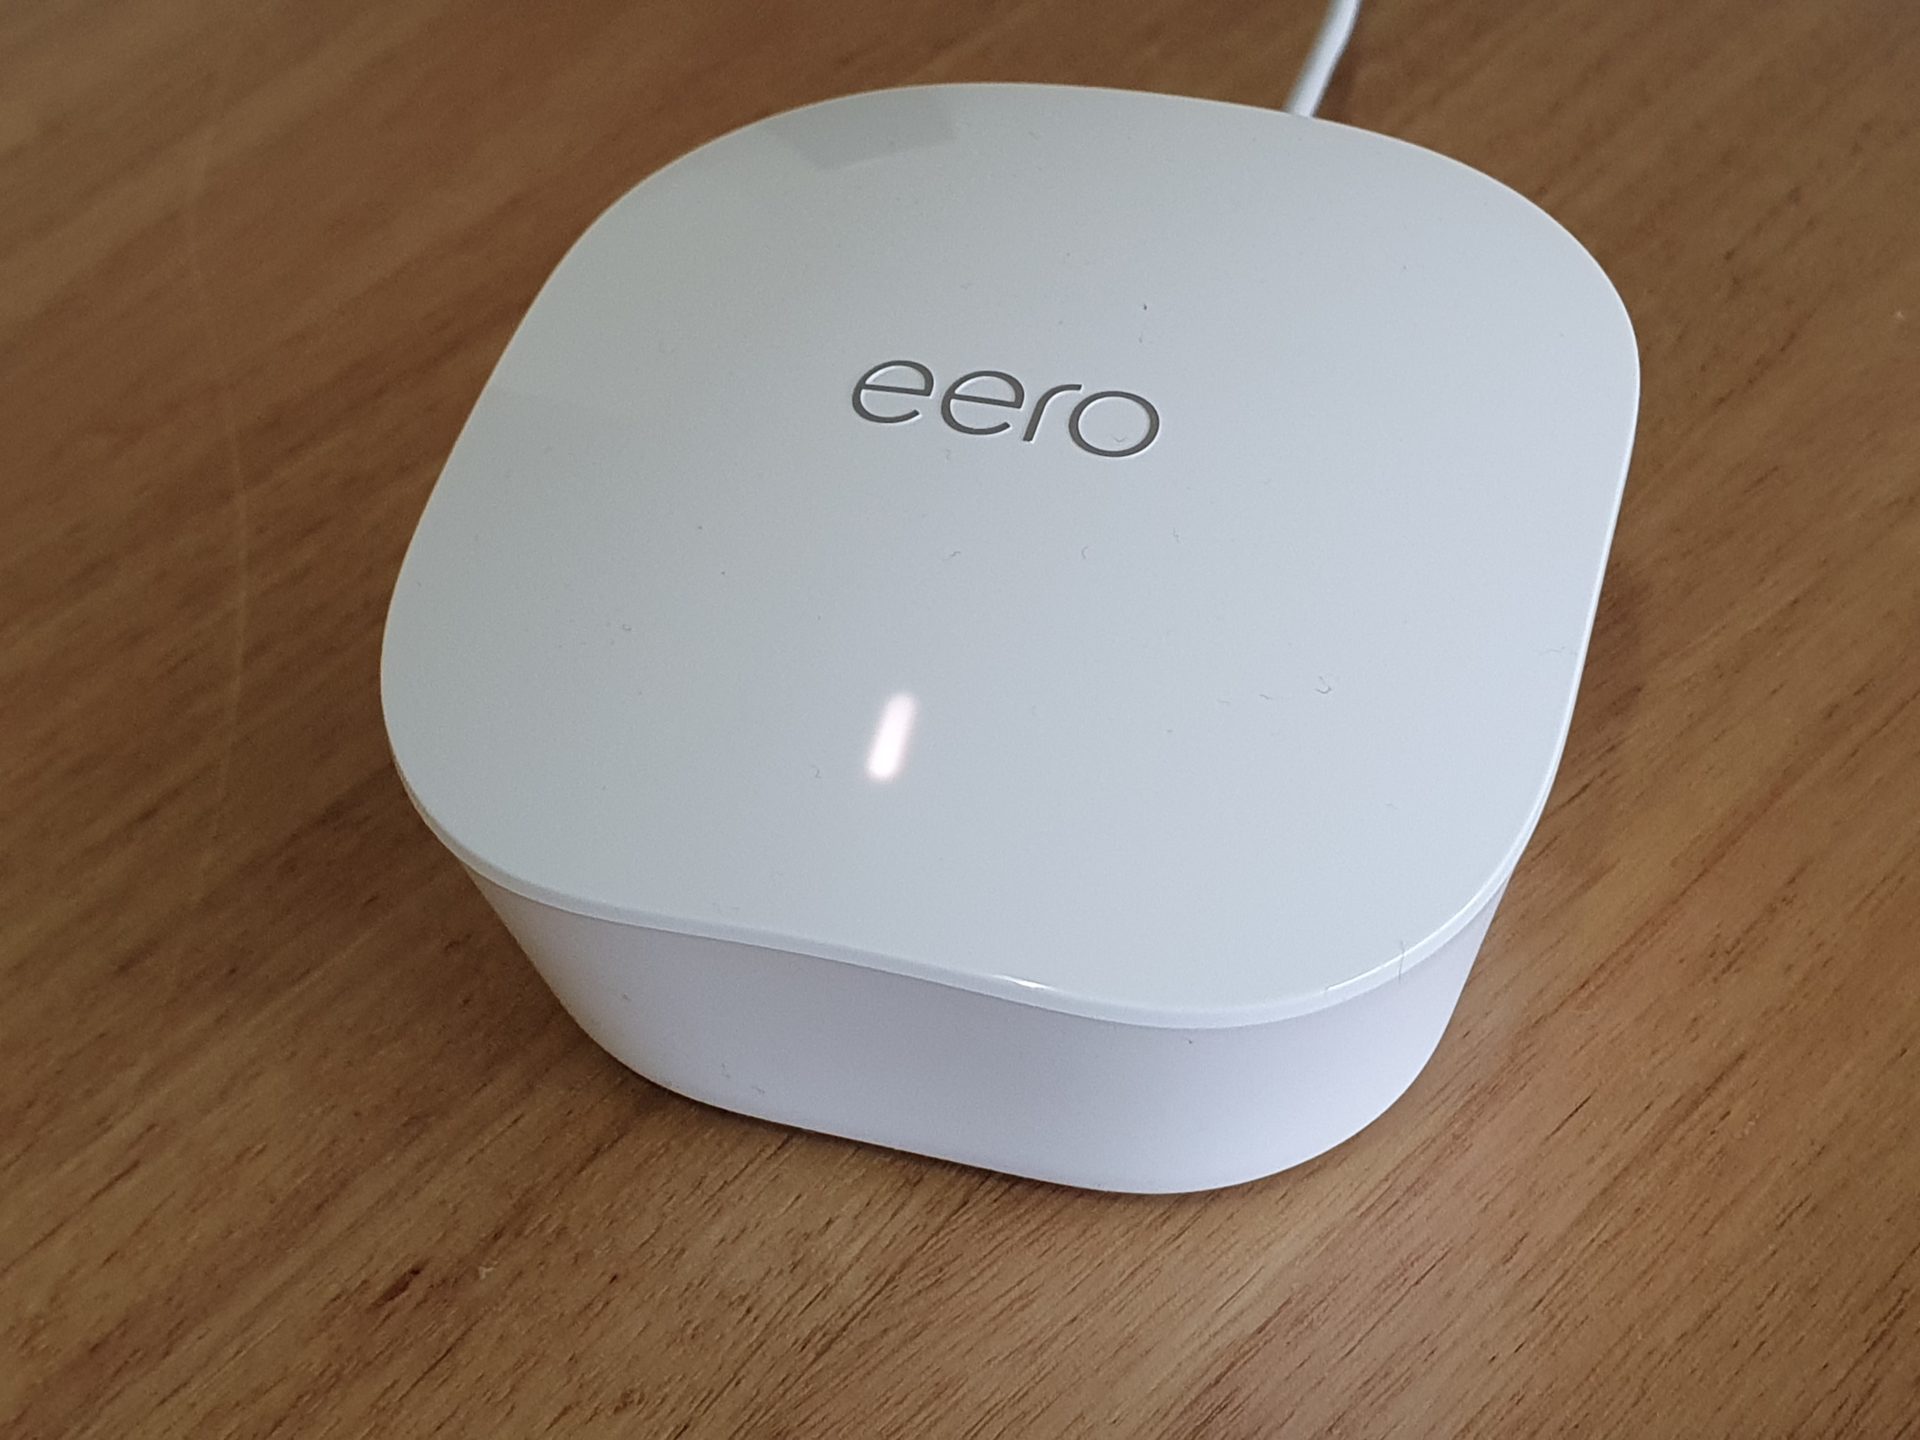 ring system eero router inside its